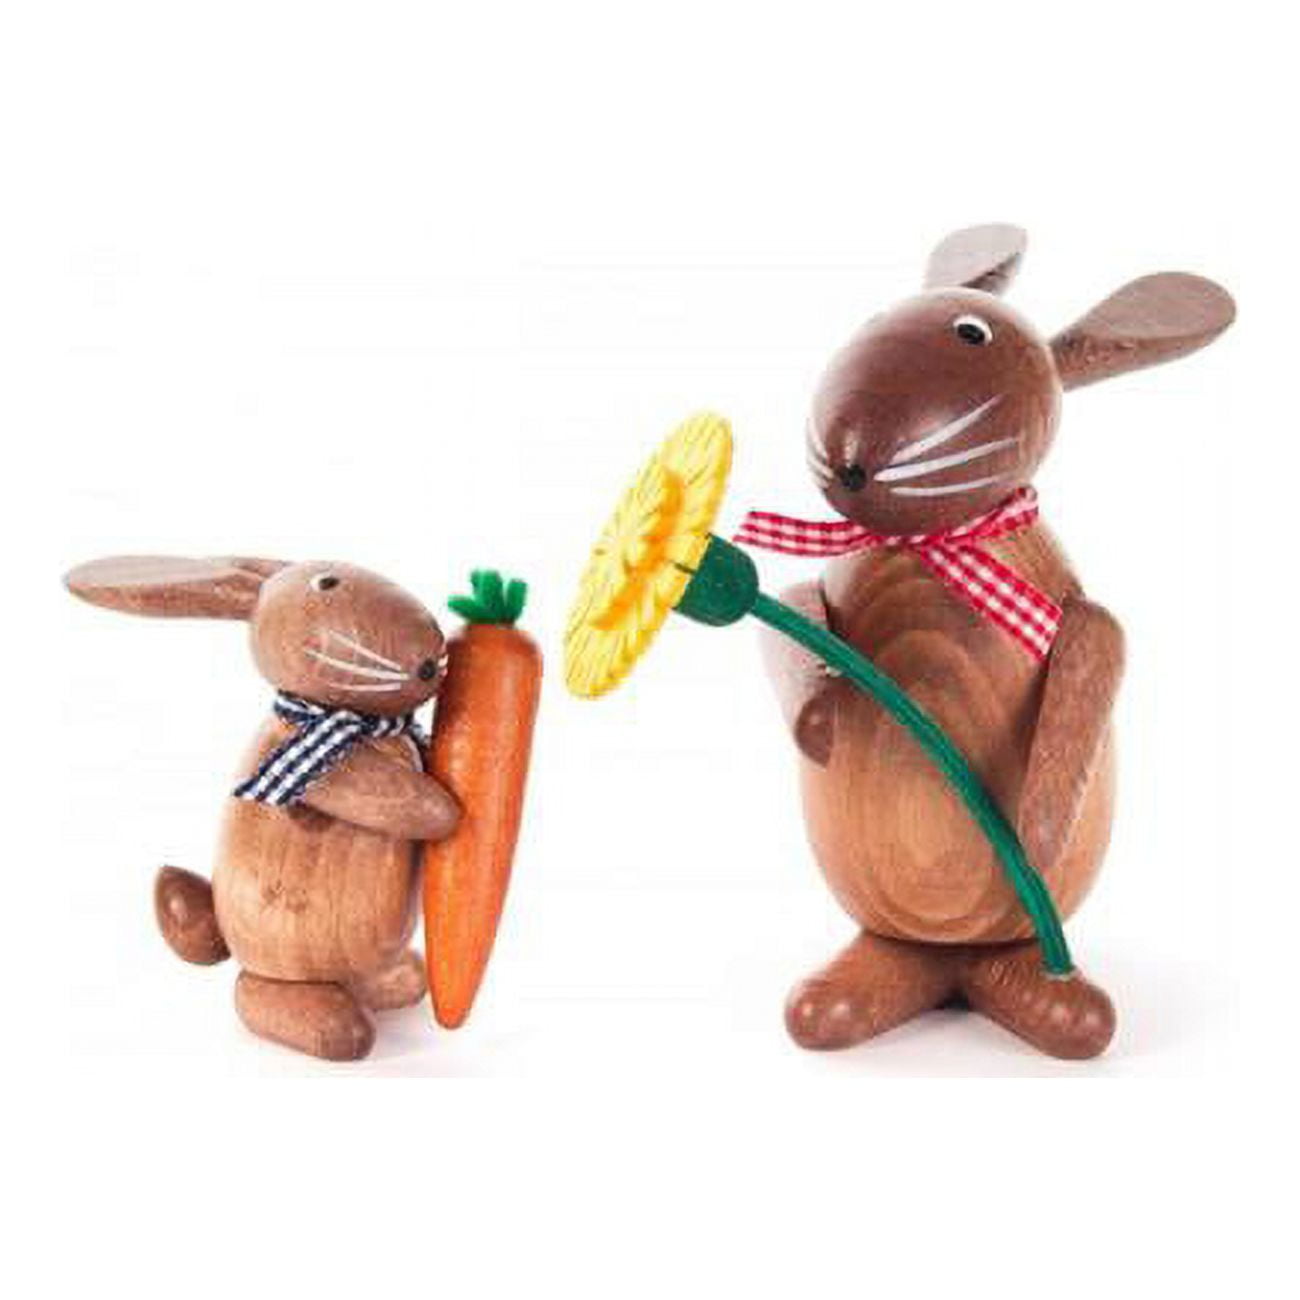 224-037 Dregeno Easter Figures - Bunnies With Mayflower & Carrot - Set Of 2